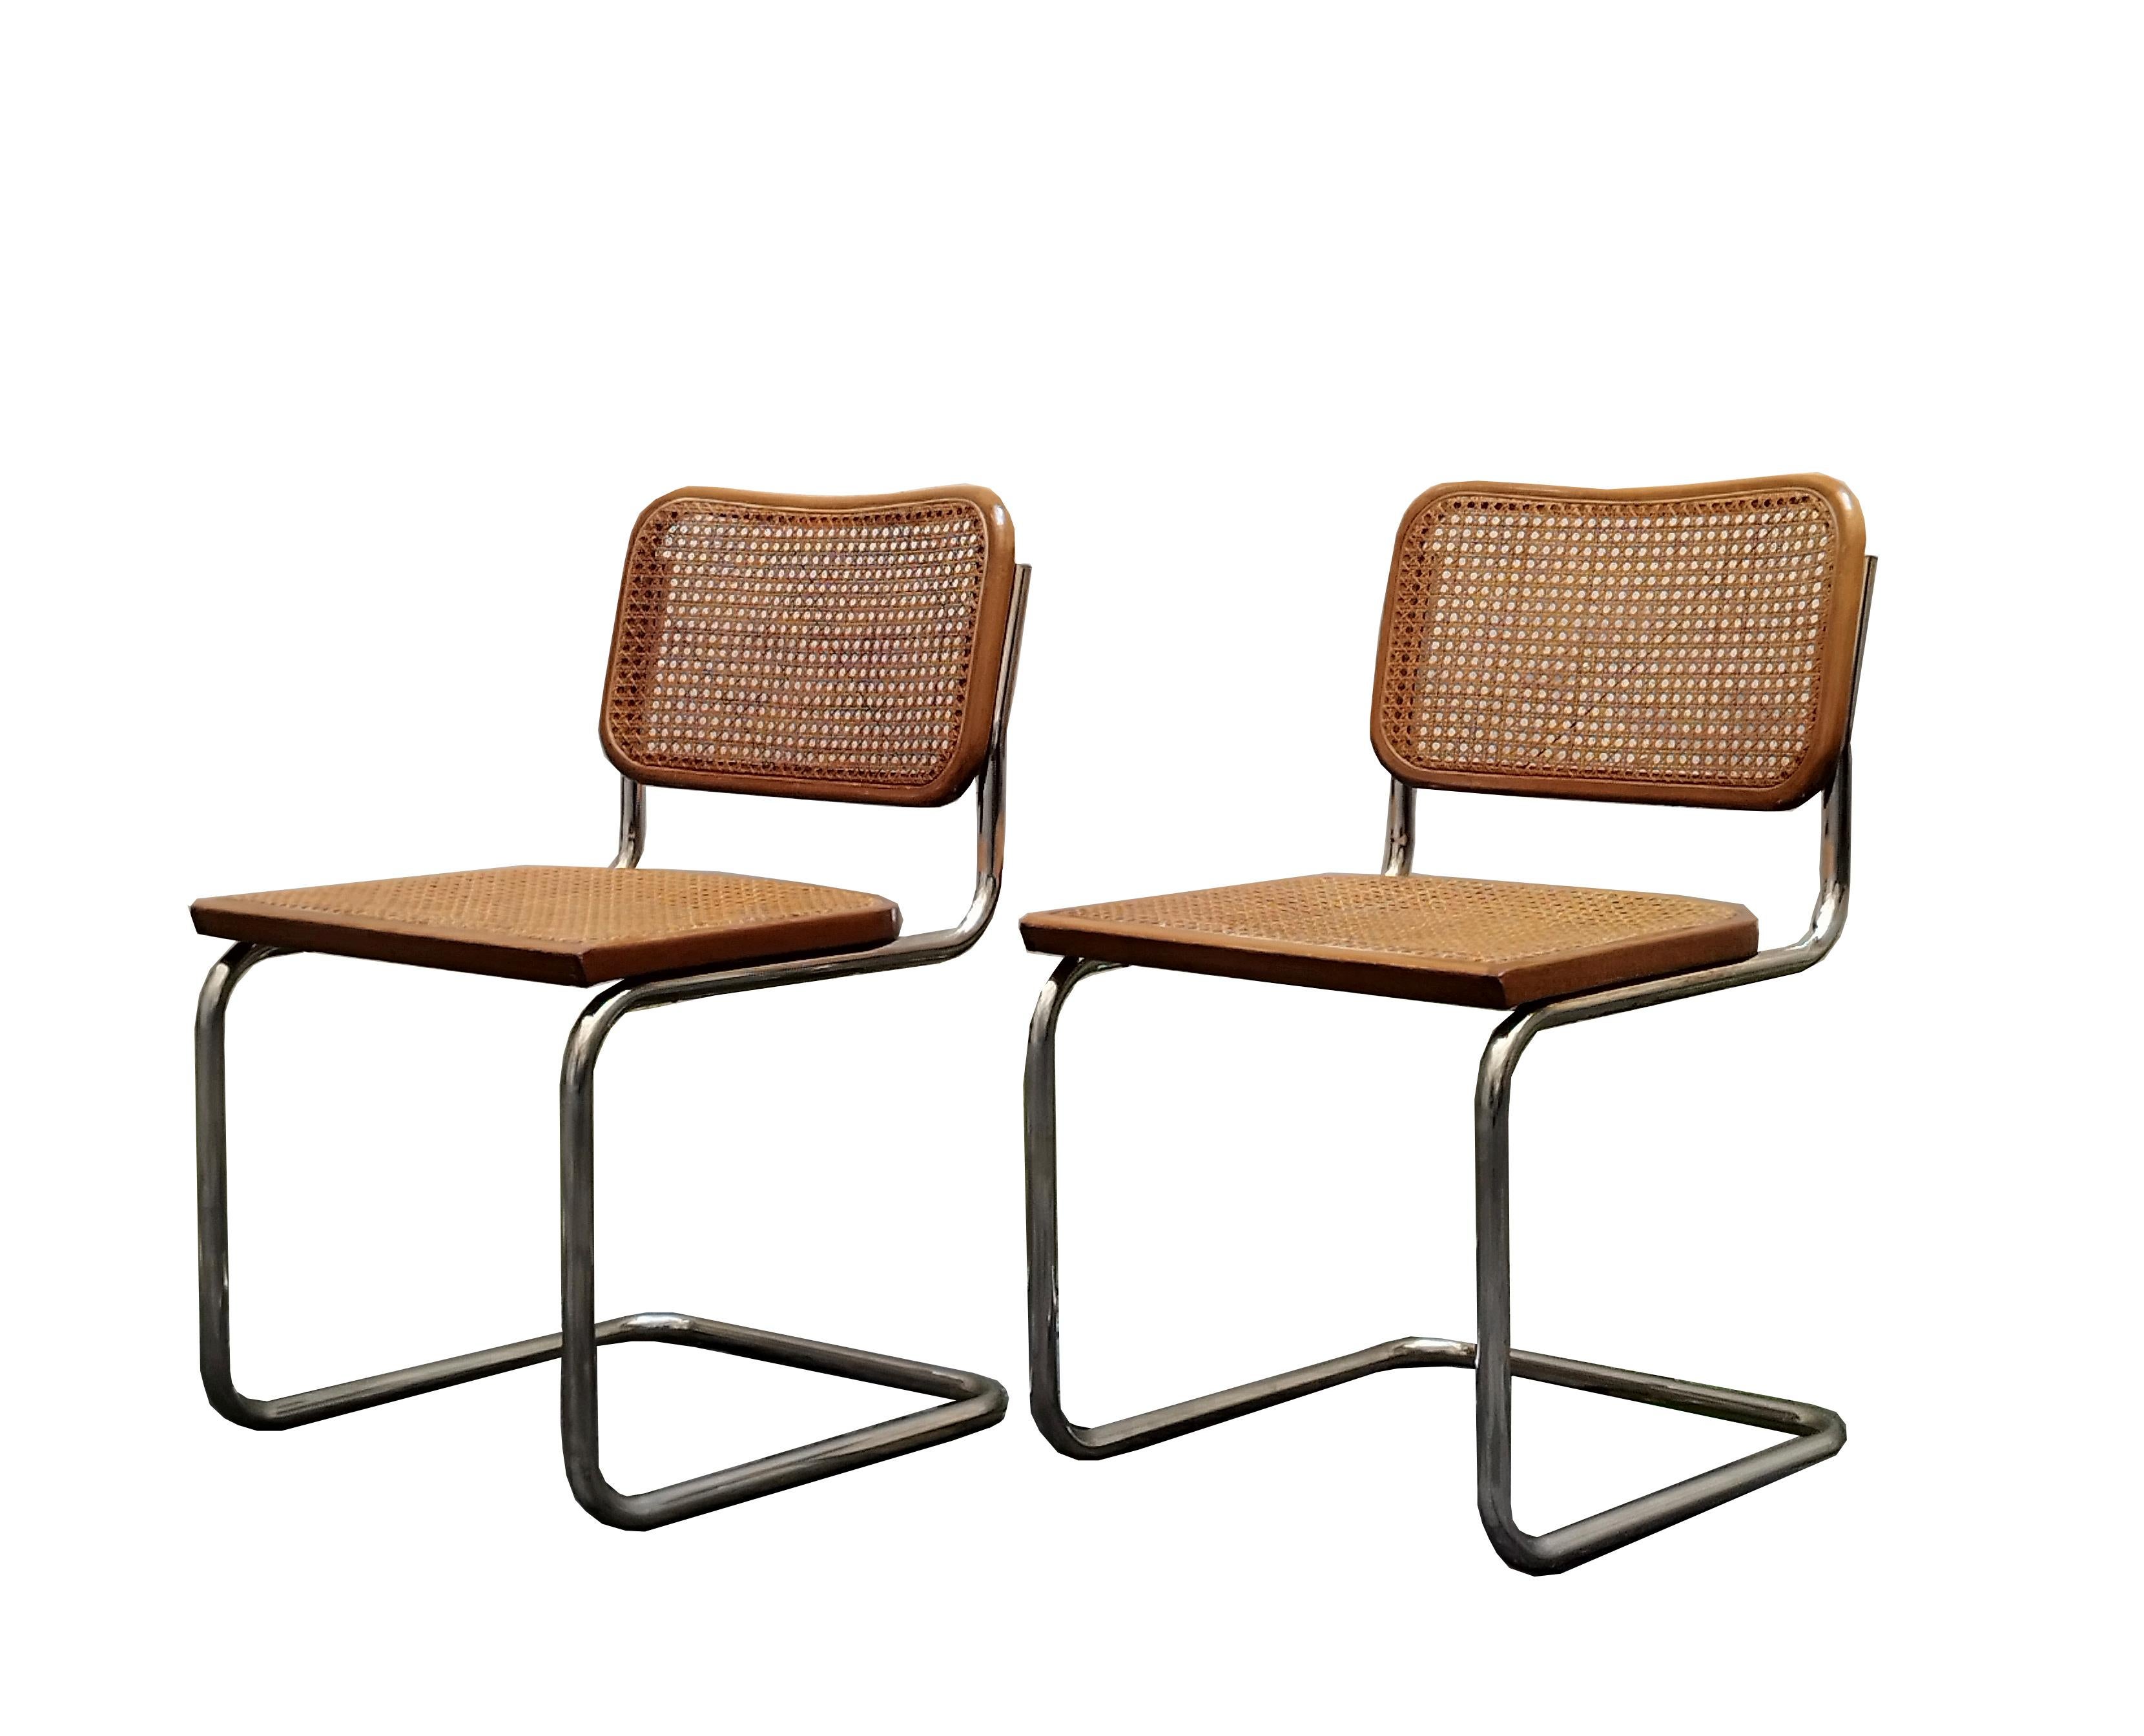 Cesca chair designed by Marcel Breuer. Marcel Breuer conceived the first tubular steel chair in 1925, based on the tubular frame of a bicycle. His revolutionary Cesca chair, named after his daughter Francesca, combines the user-friendliness of